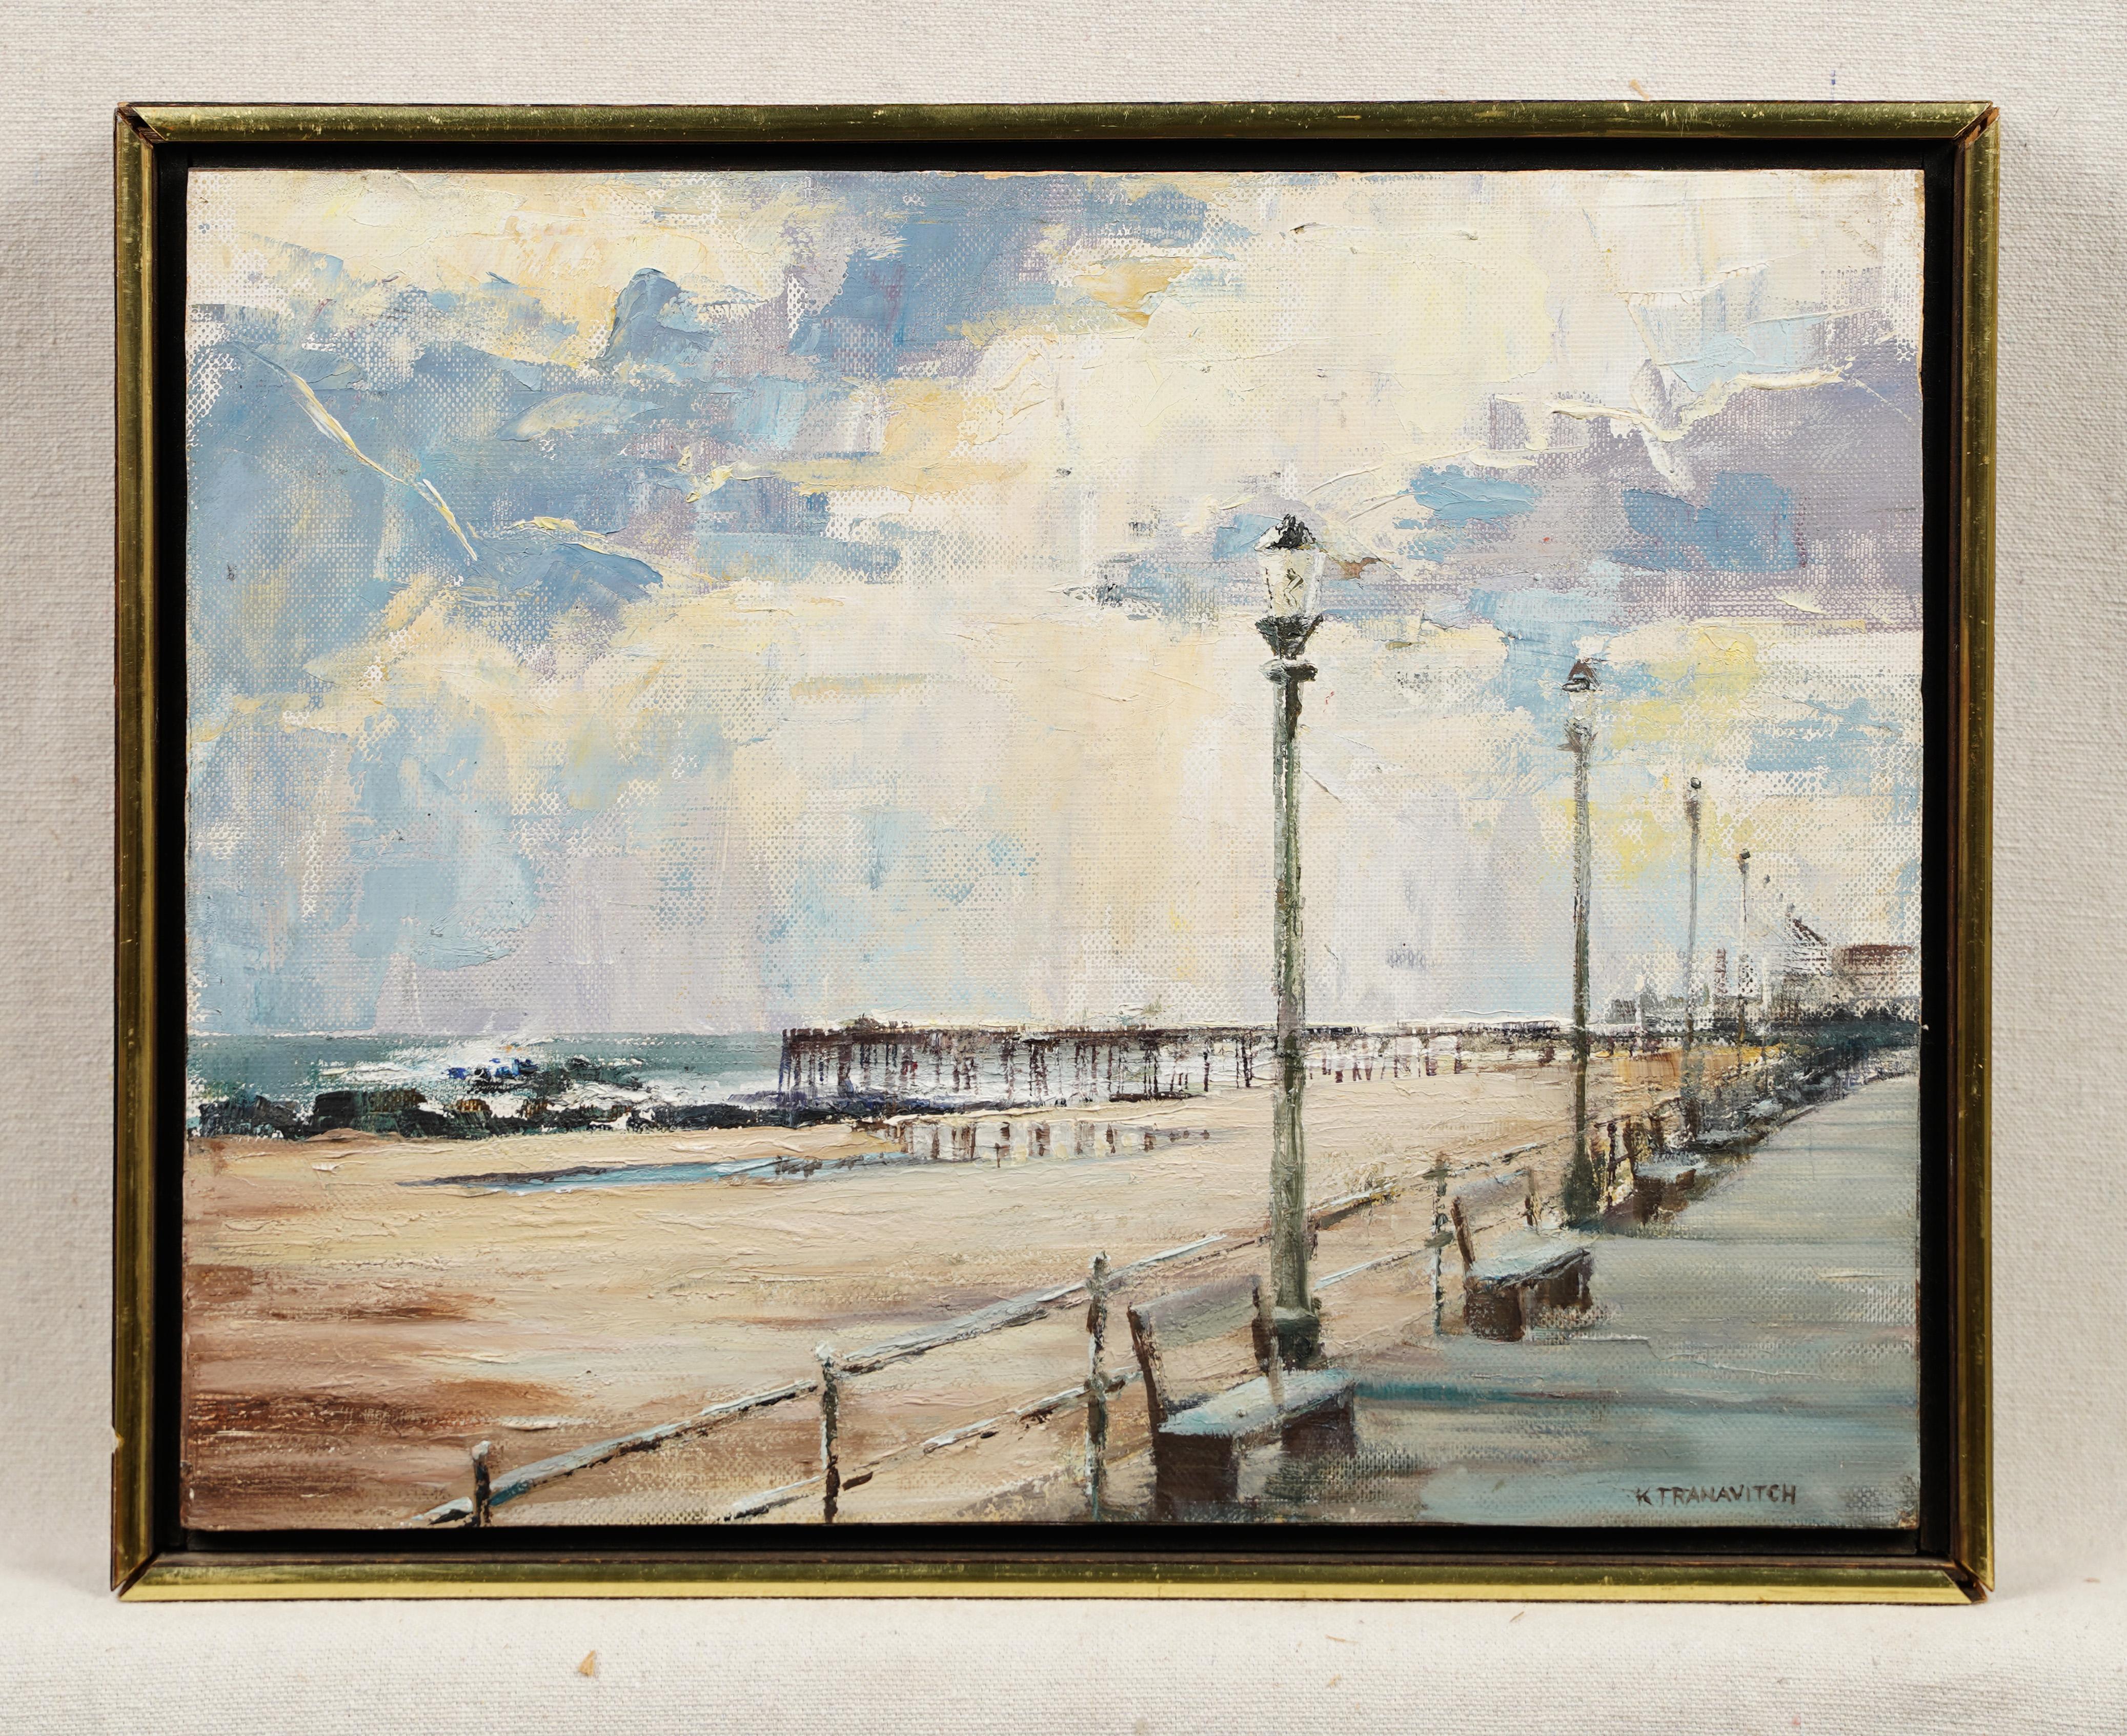 Antique American modernist signed beach scene oil painting.  Oil on canvasboard.  Signed.  Framed. 